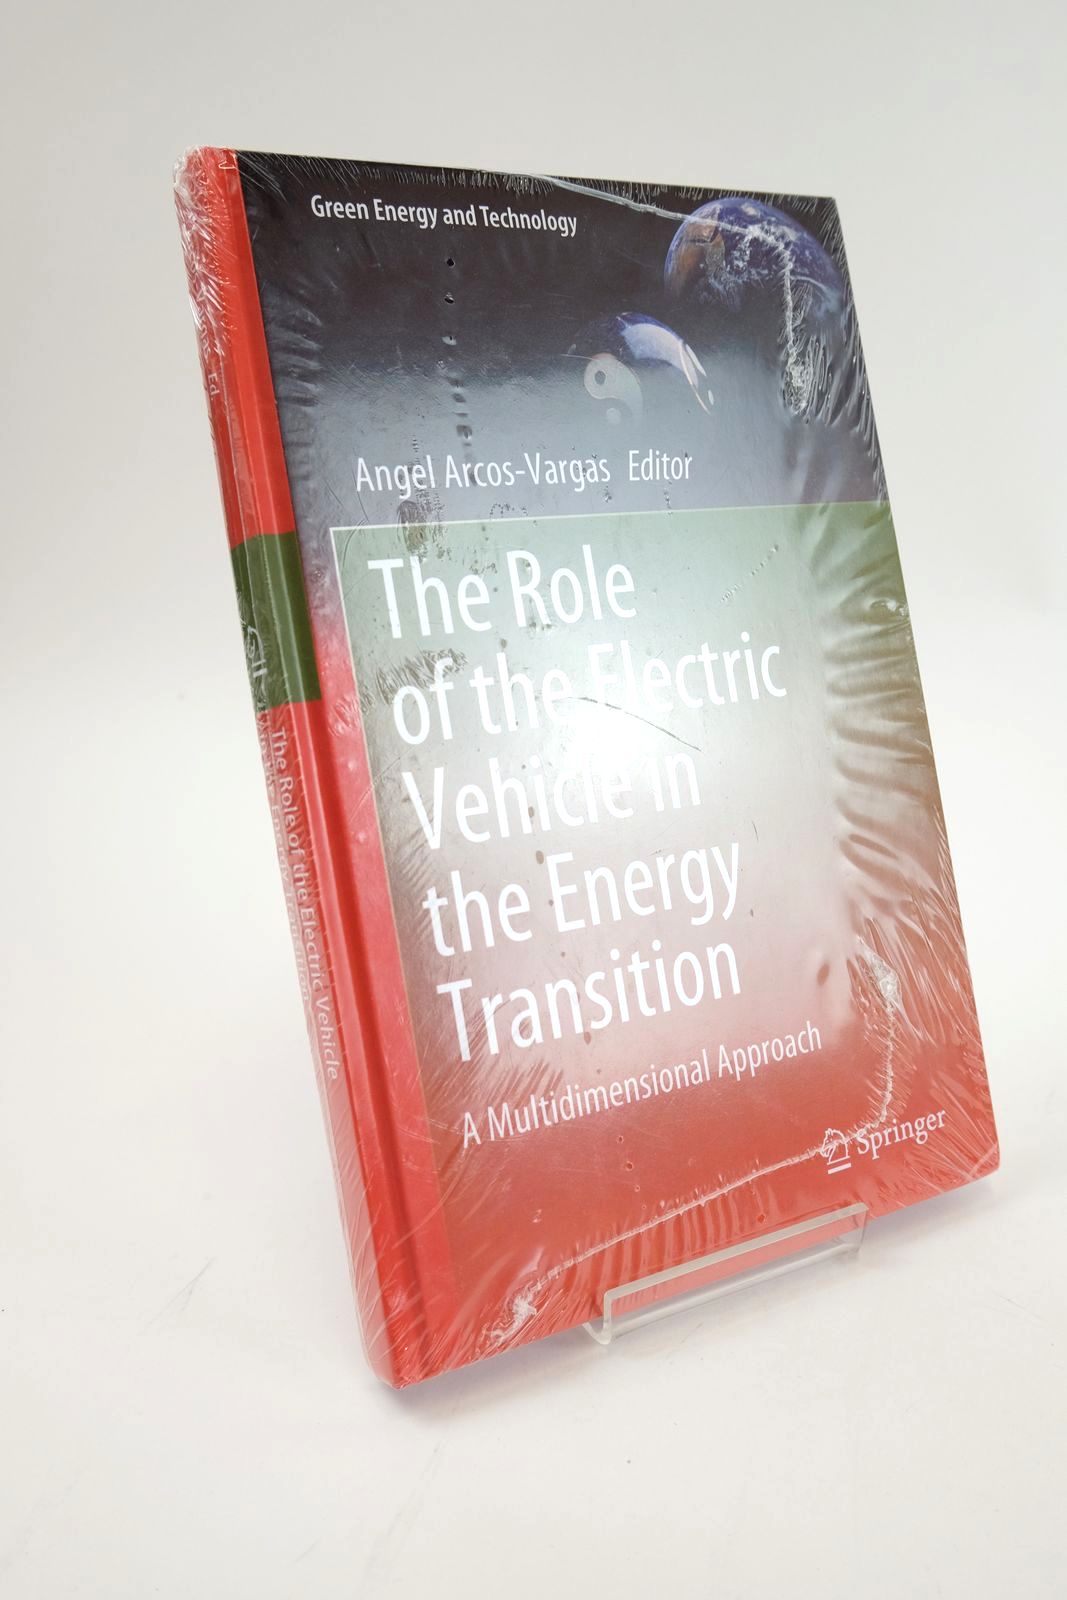 Photo of THE ROLE OF THE ELECTRIC VEHICLE IN THE ENERGY TRANSITION- Stock Number: 1324939